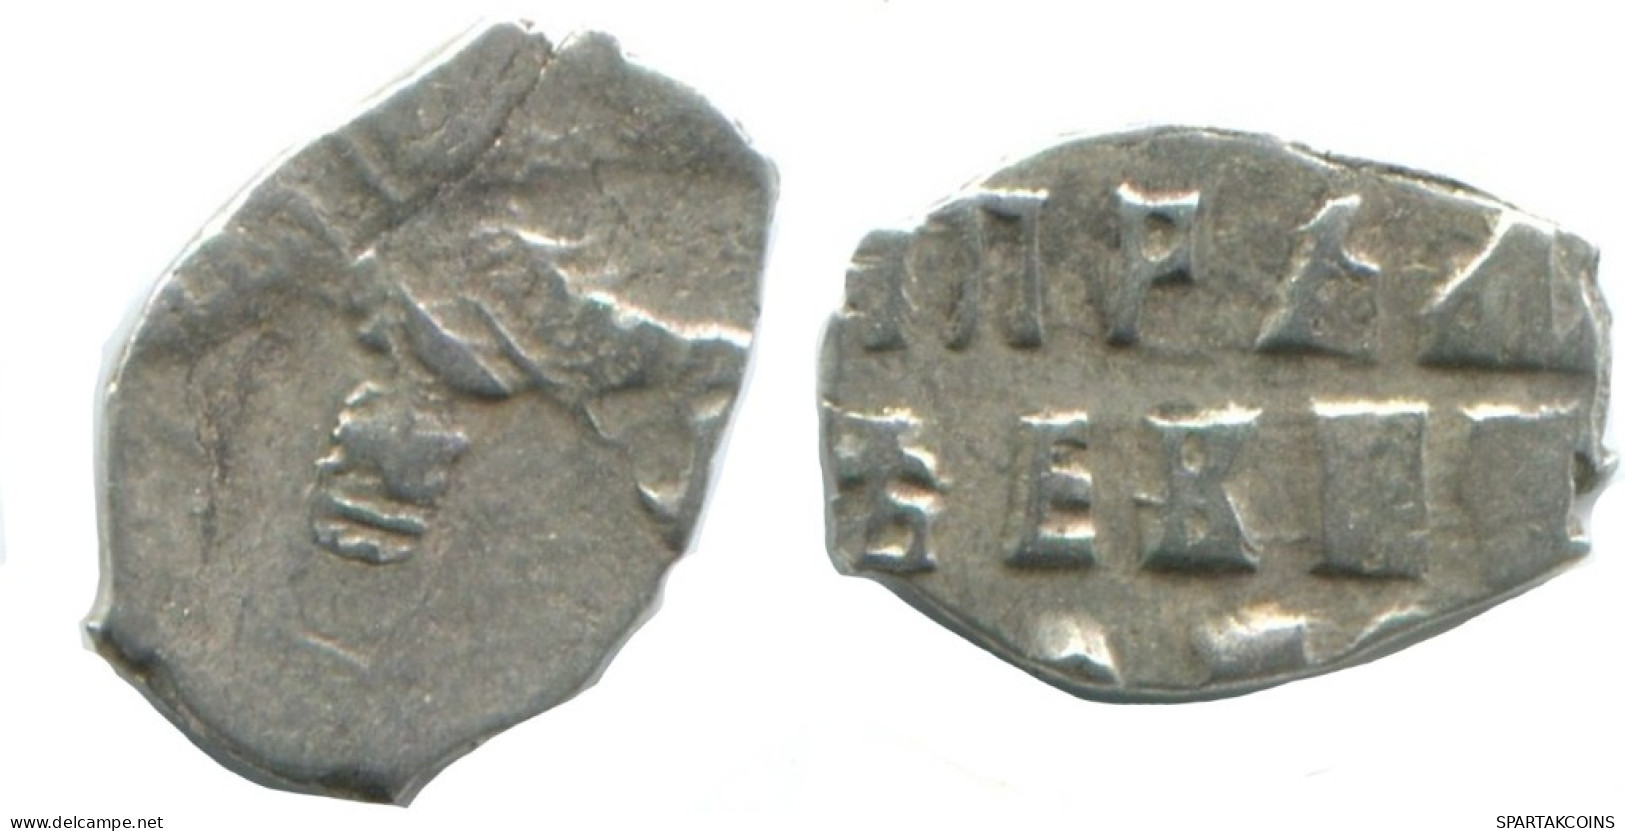 RUSSIE RUSSIA 1702 KOPECK PETER I KADASHEVSKY Mint MOSCOW ARGENT 0.3g/8mm #AB602.10.F.A - Russia